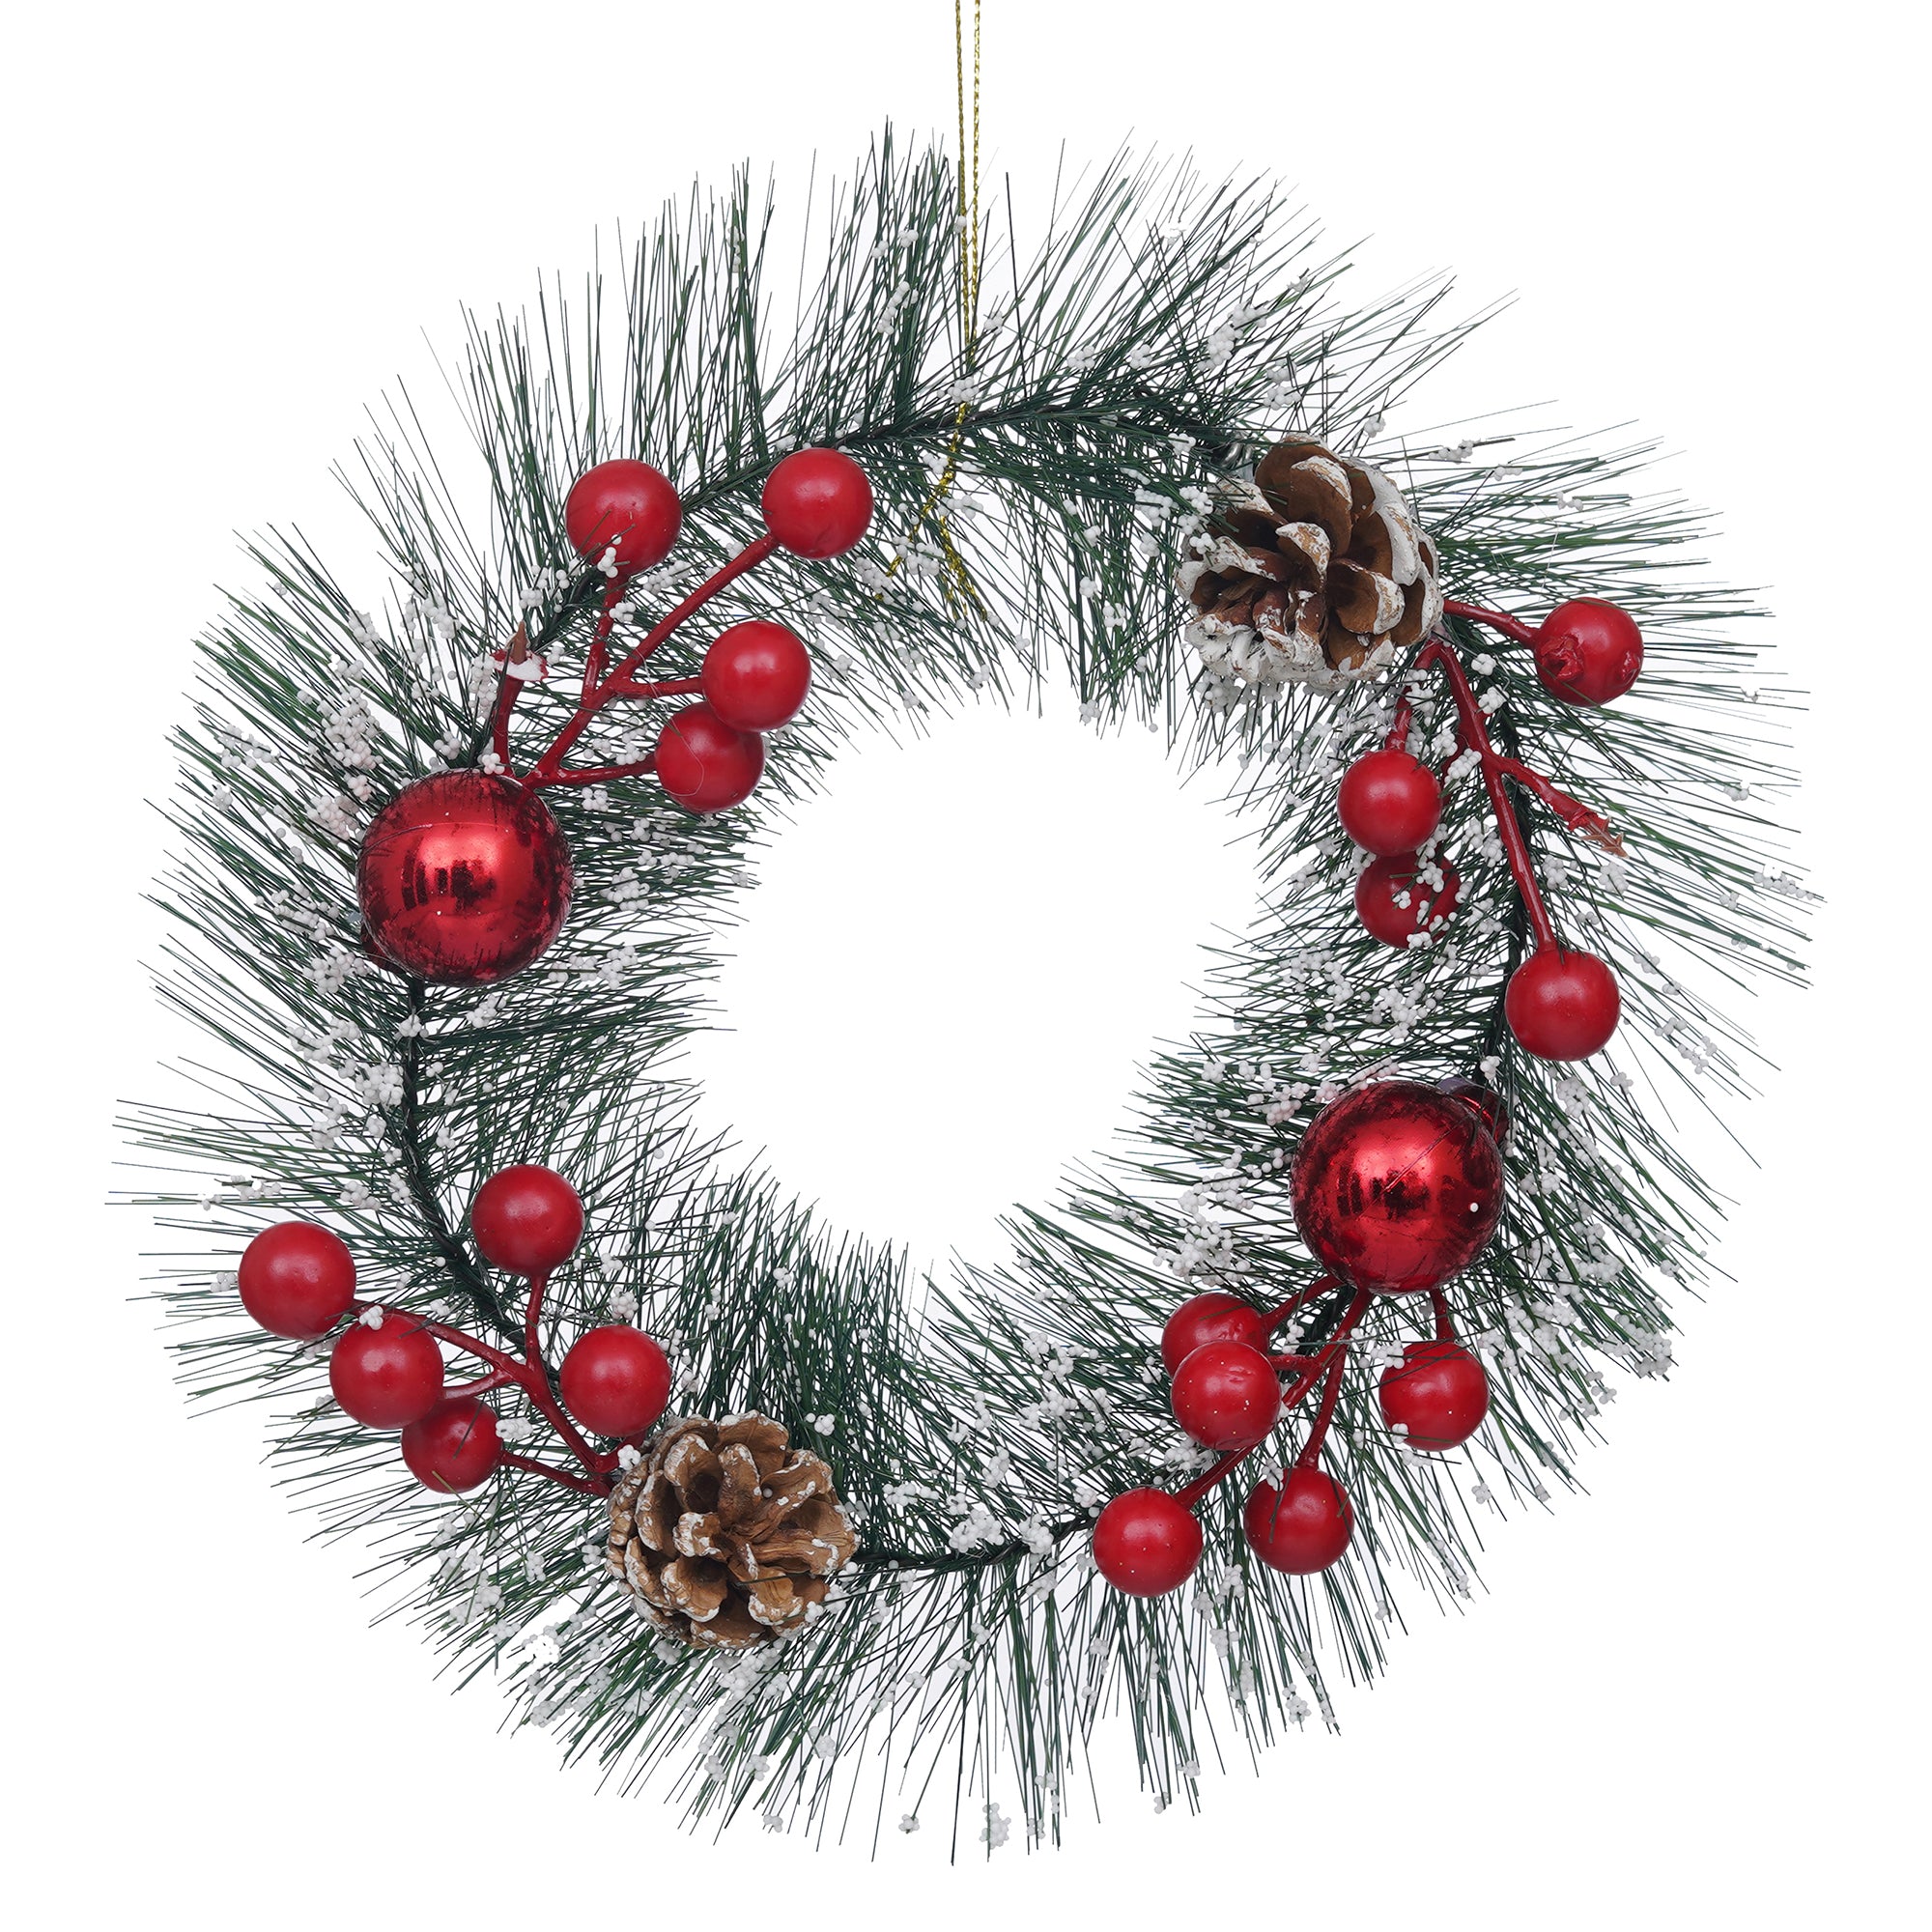 eCraftIndia Green Merry Christmas Wreath With Red Berries, Balls, Flowers - Christmas Front Door Ornament and Wall Decoration - Artificial Pine Garland for Xmas Party Decor 2